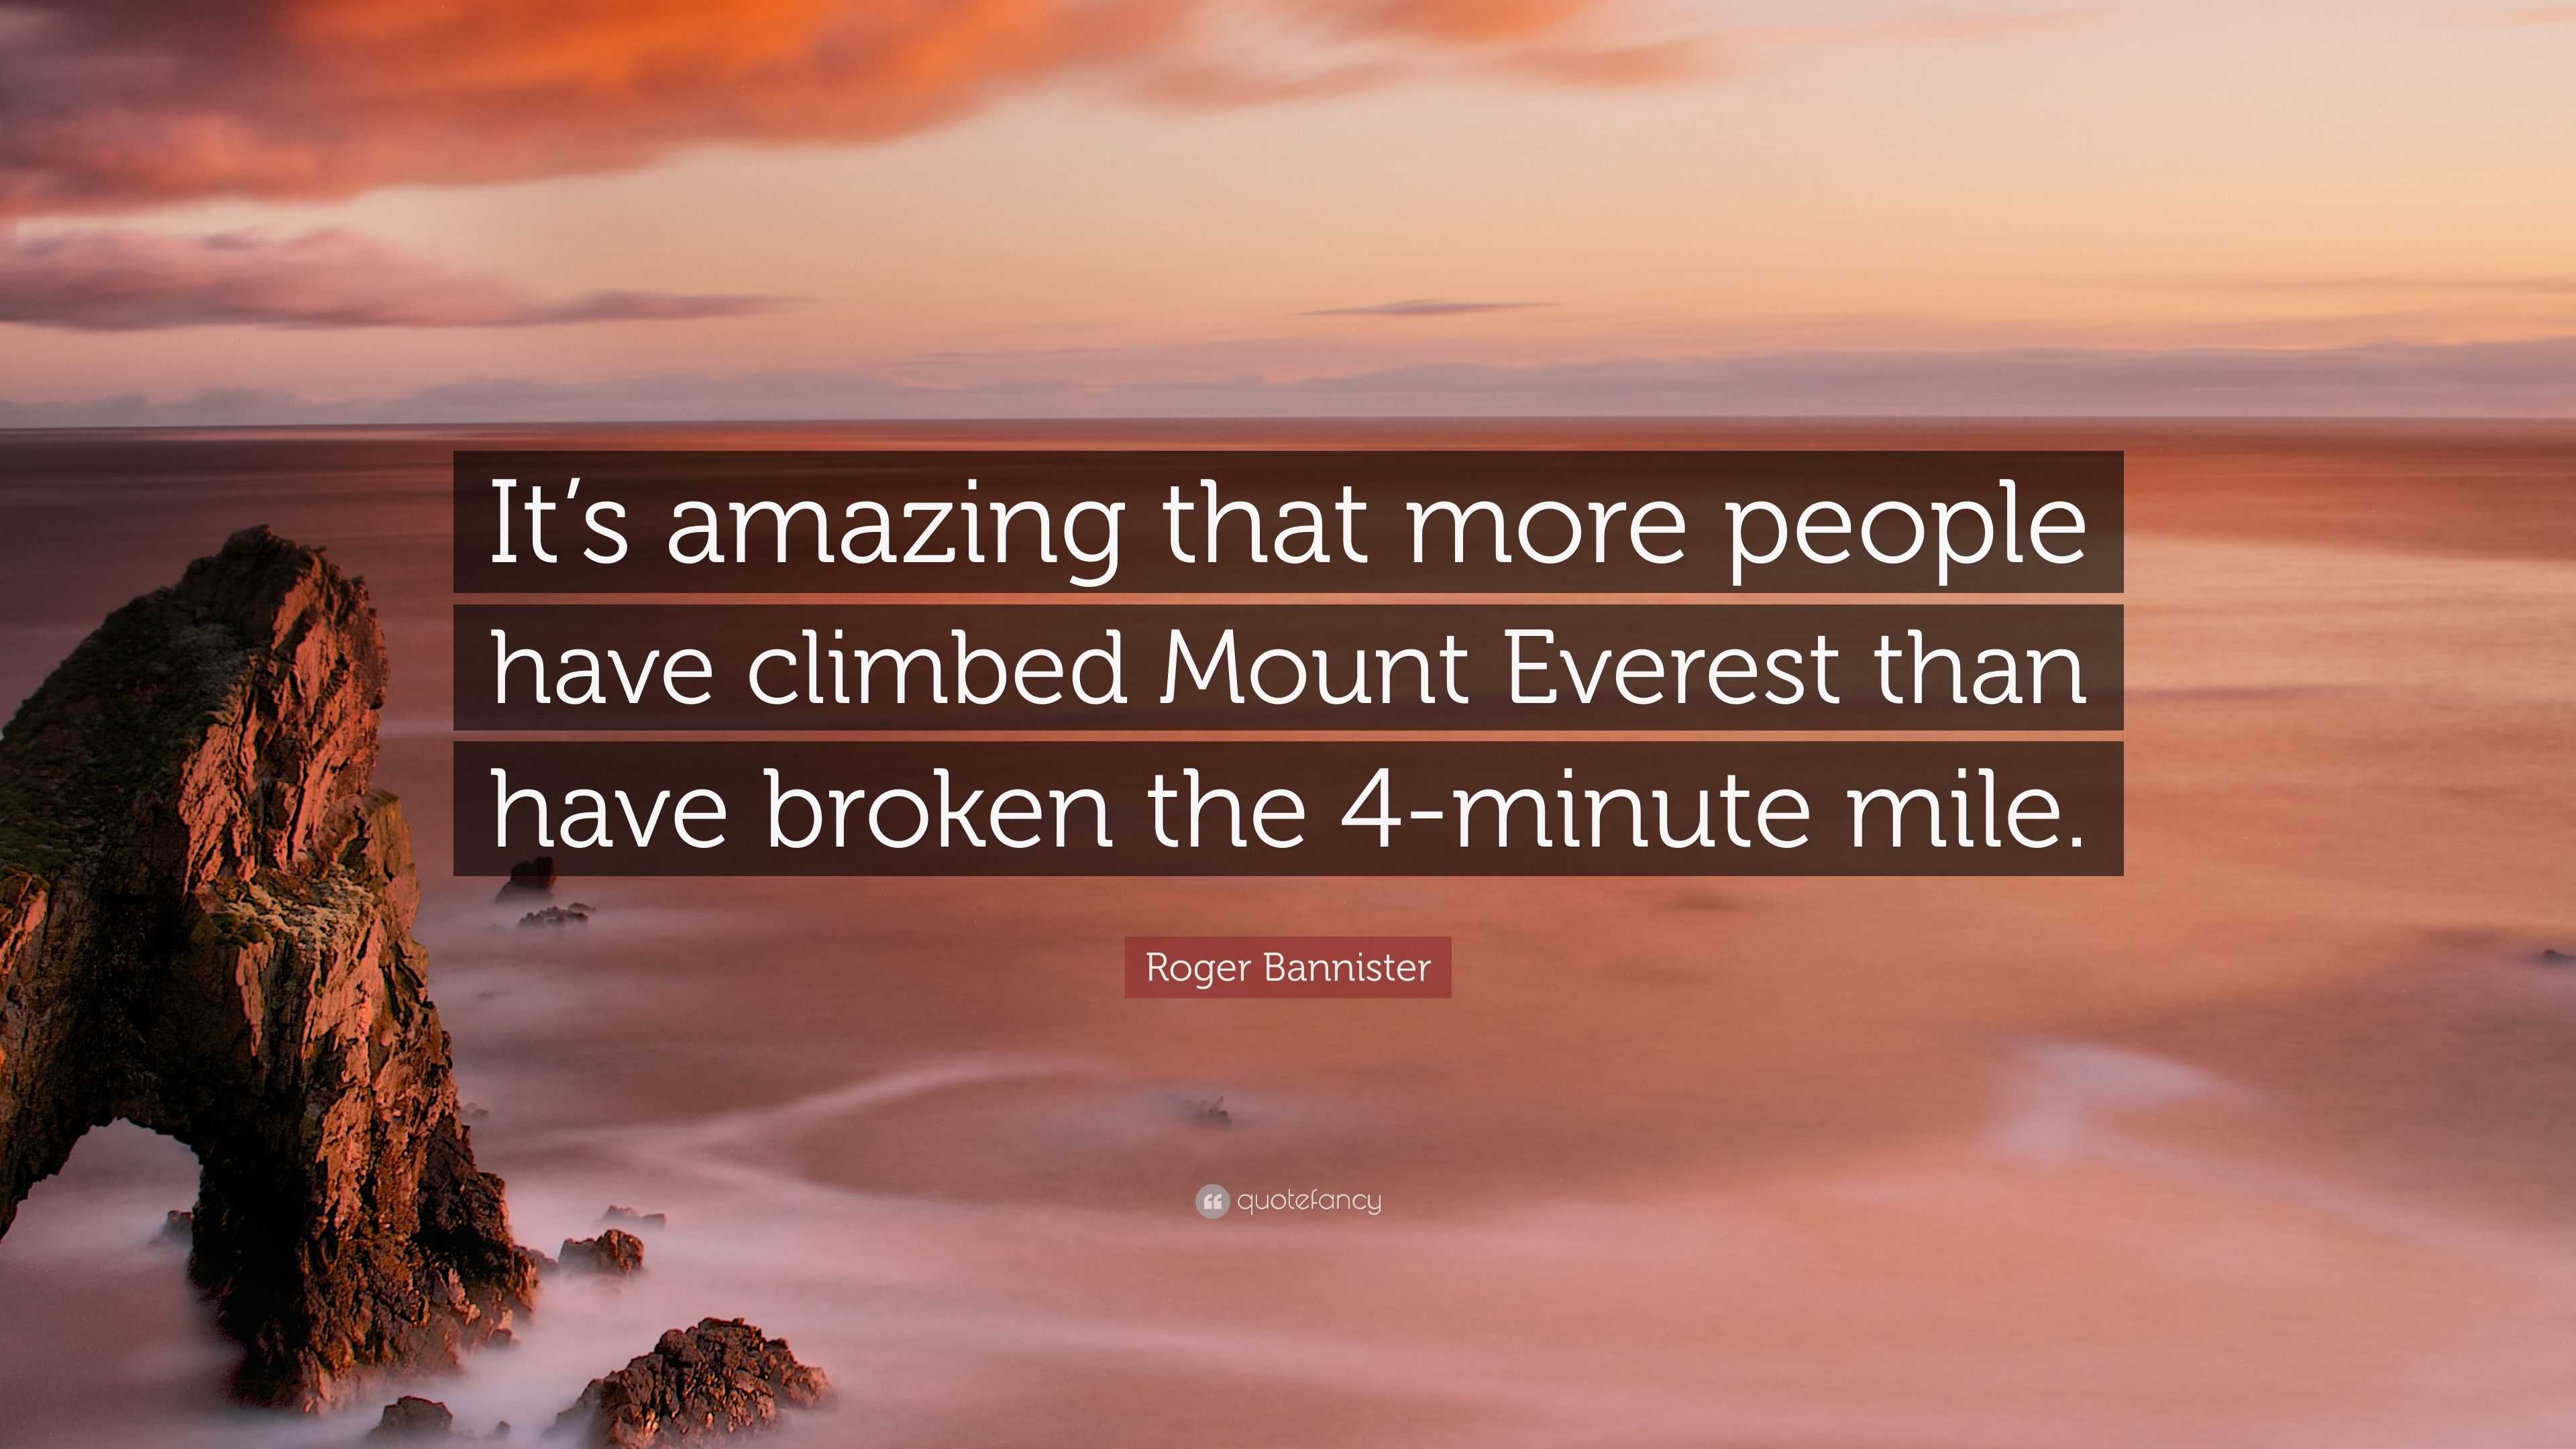 Roger Bannister Quote: “It’s amazing that more people have climbed